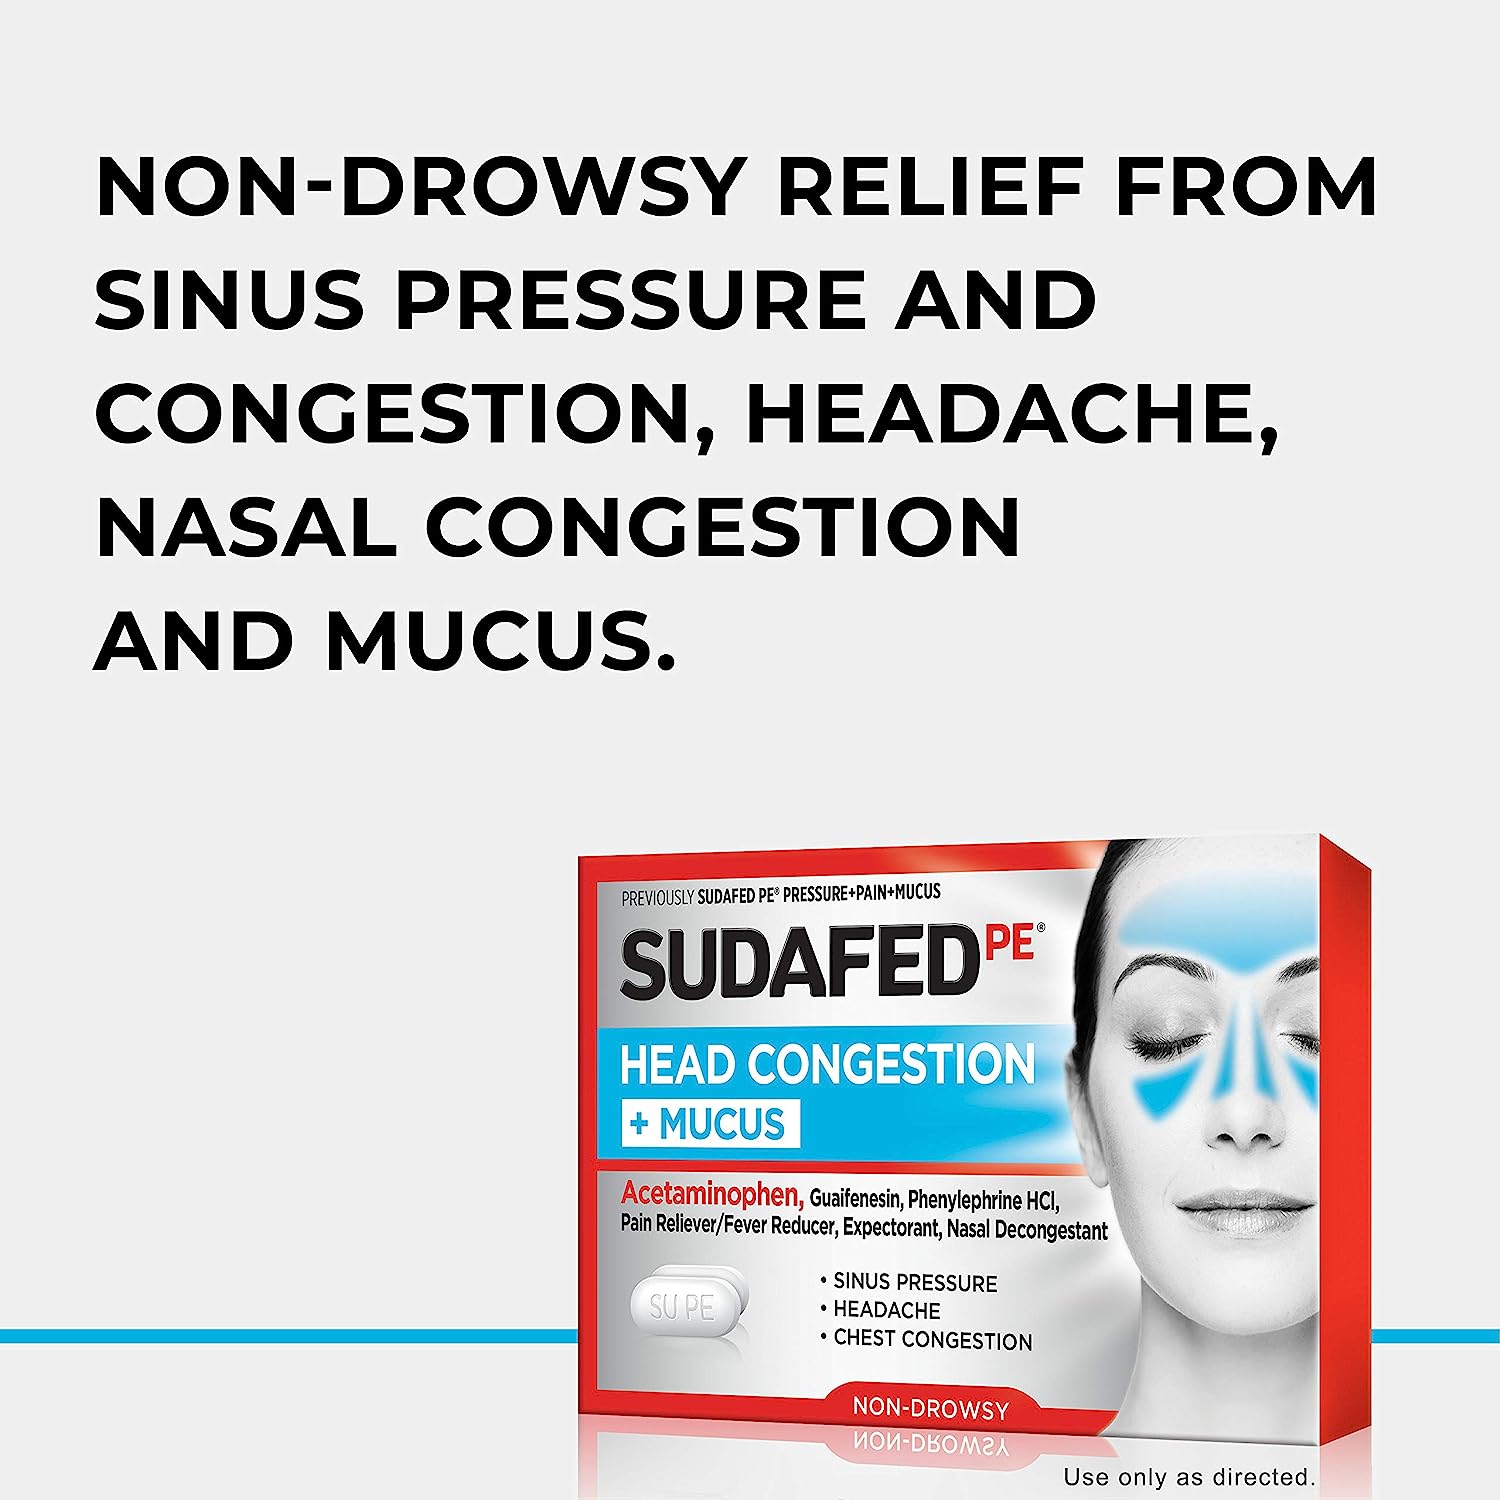 Sudafed PE Head Congestion + Mucus Relief Tablets for Sinus Pressure, Congestion, & Headache, Non-Drowsy Decongestant with Acetaminophen, Guaifenesin & Phenylephrine HCI, 24 ct : Health & Household